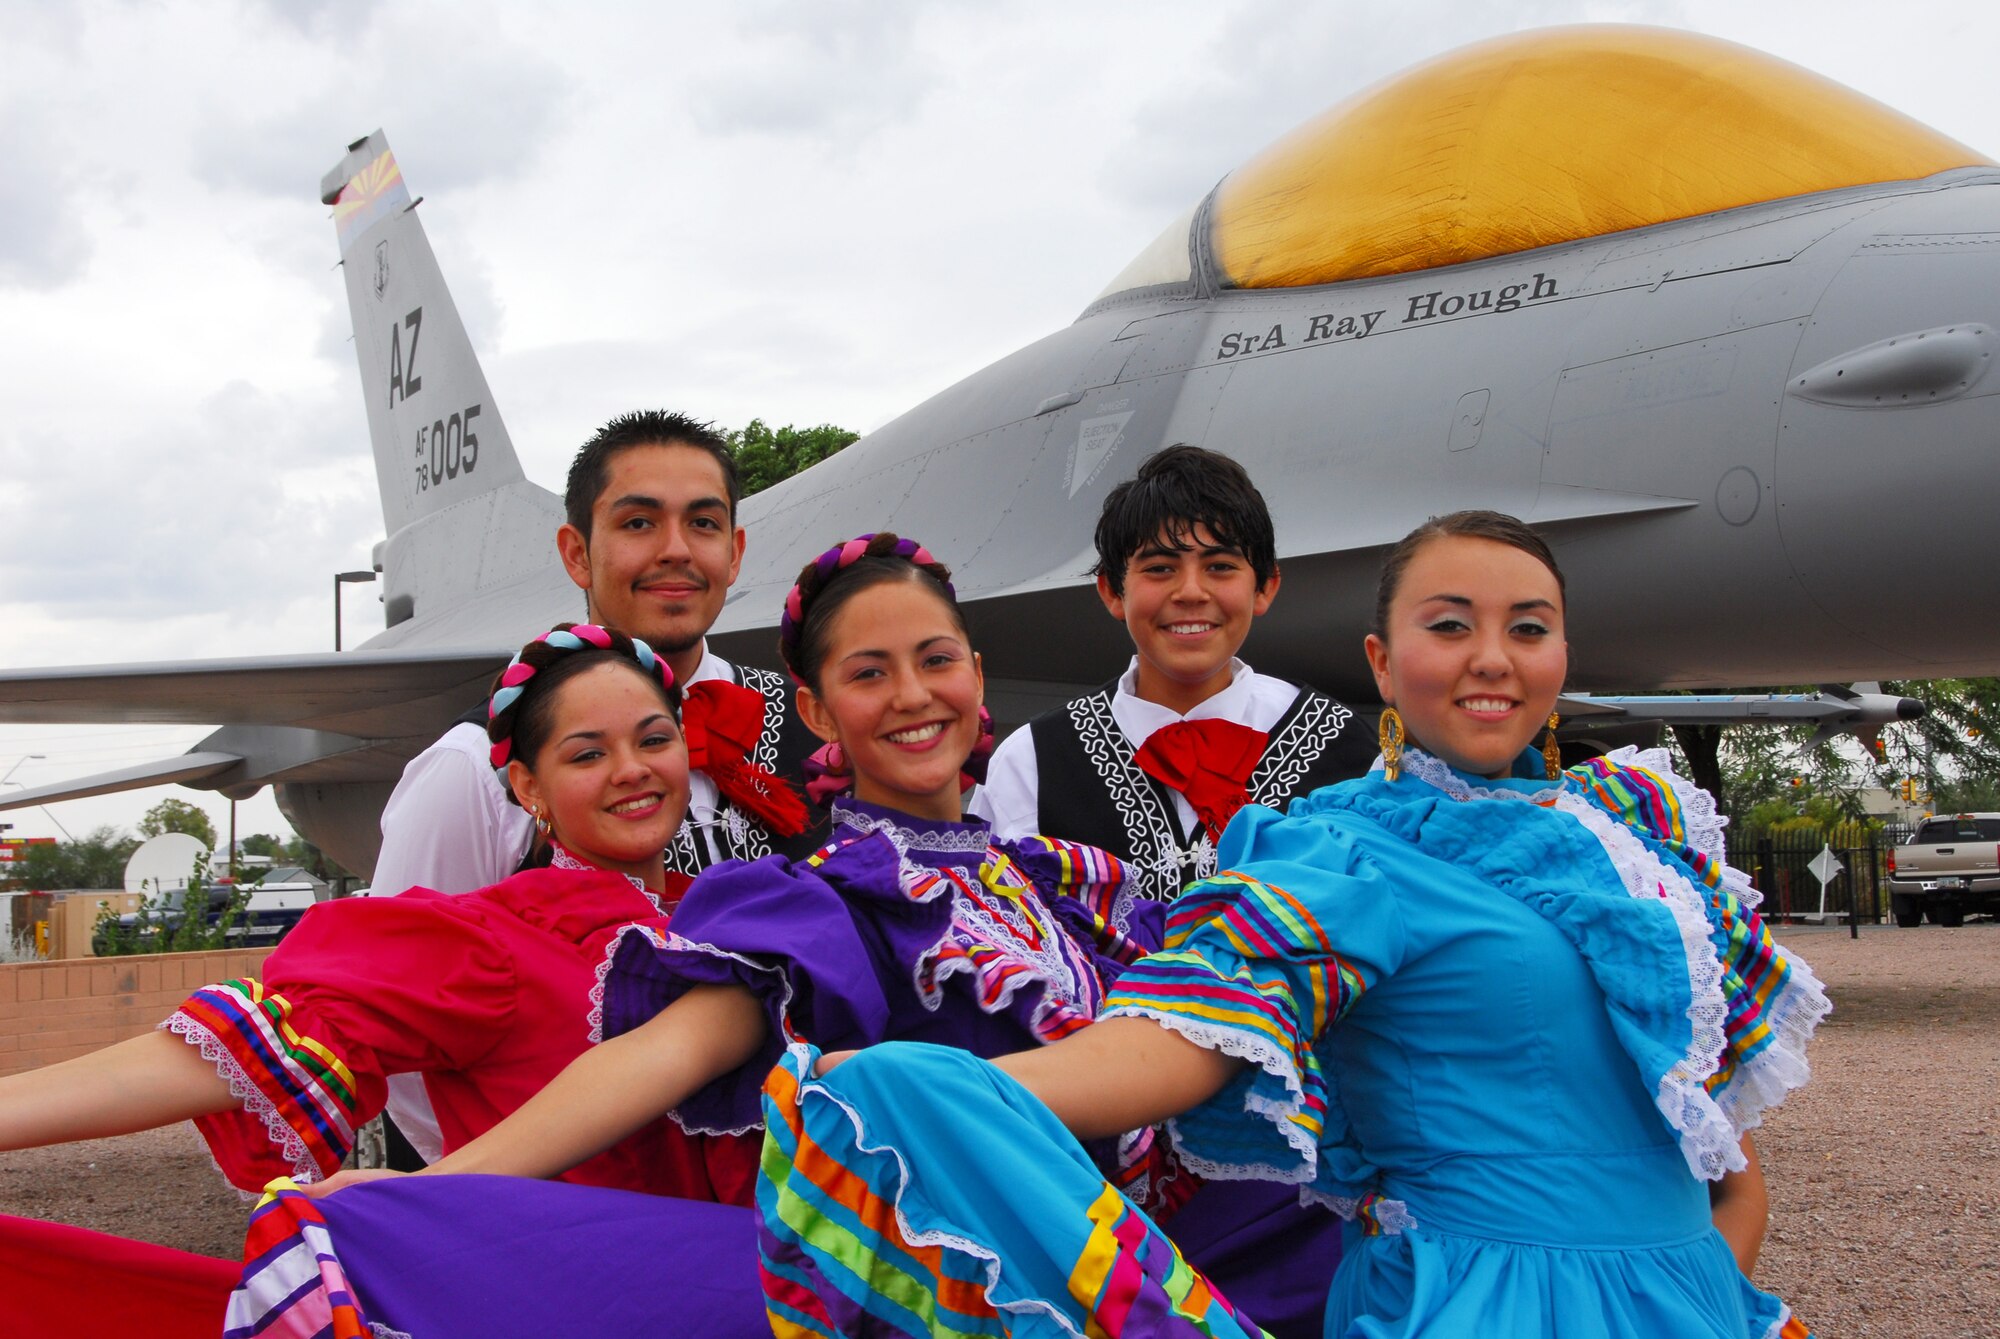 Tucson’s Ballet Folklorico Los Mextucaz, take a souvenir photo in front of an F-16 static display at the 162nd Fighter Wing at Tucson International Airport. The dance team demonstrated Mexican folk dancing at the wing to celebrate Hispanic Heritage month, Oct. 3, 2008. (Air National Guard photo by Master Sgt. Dave Neve)